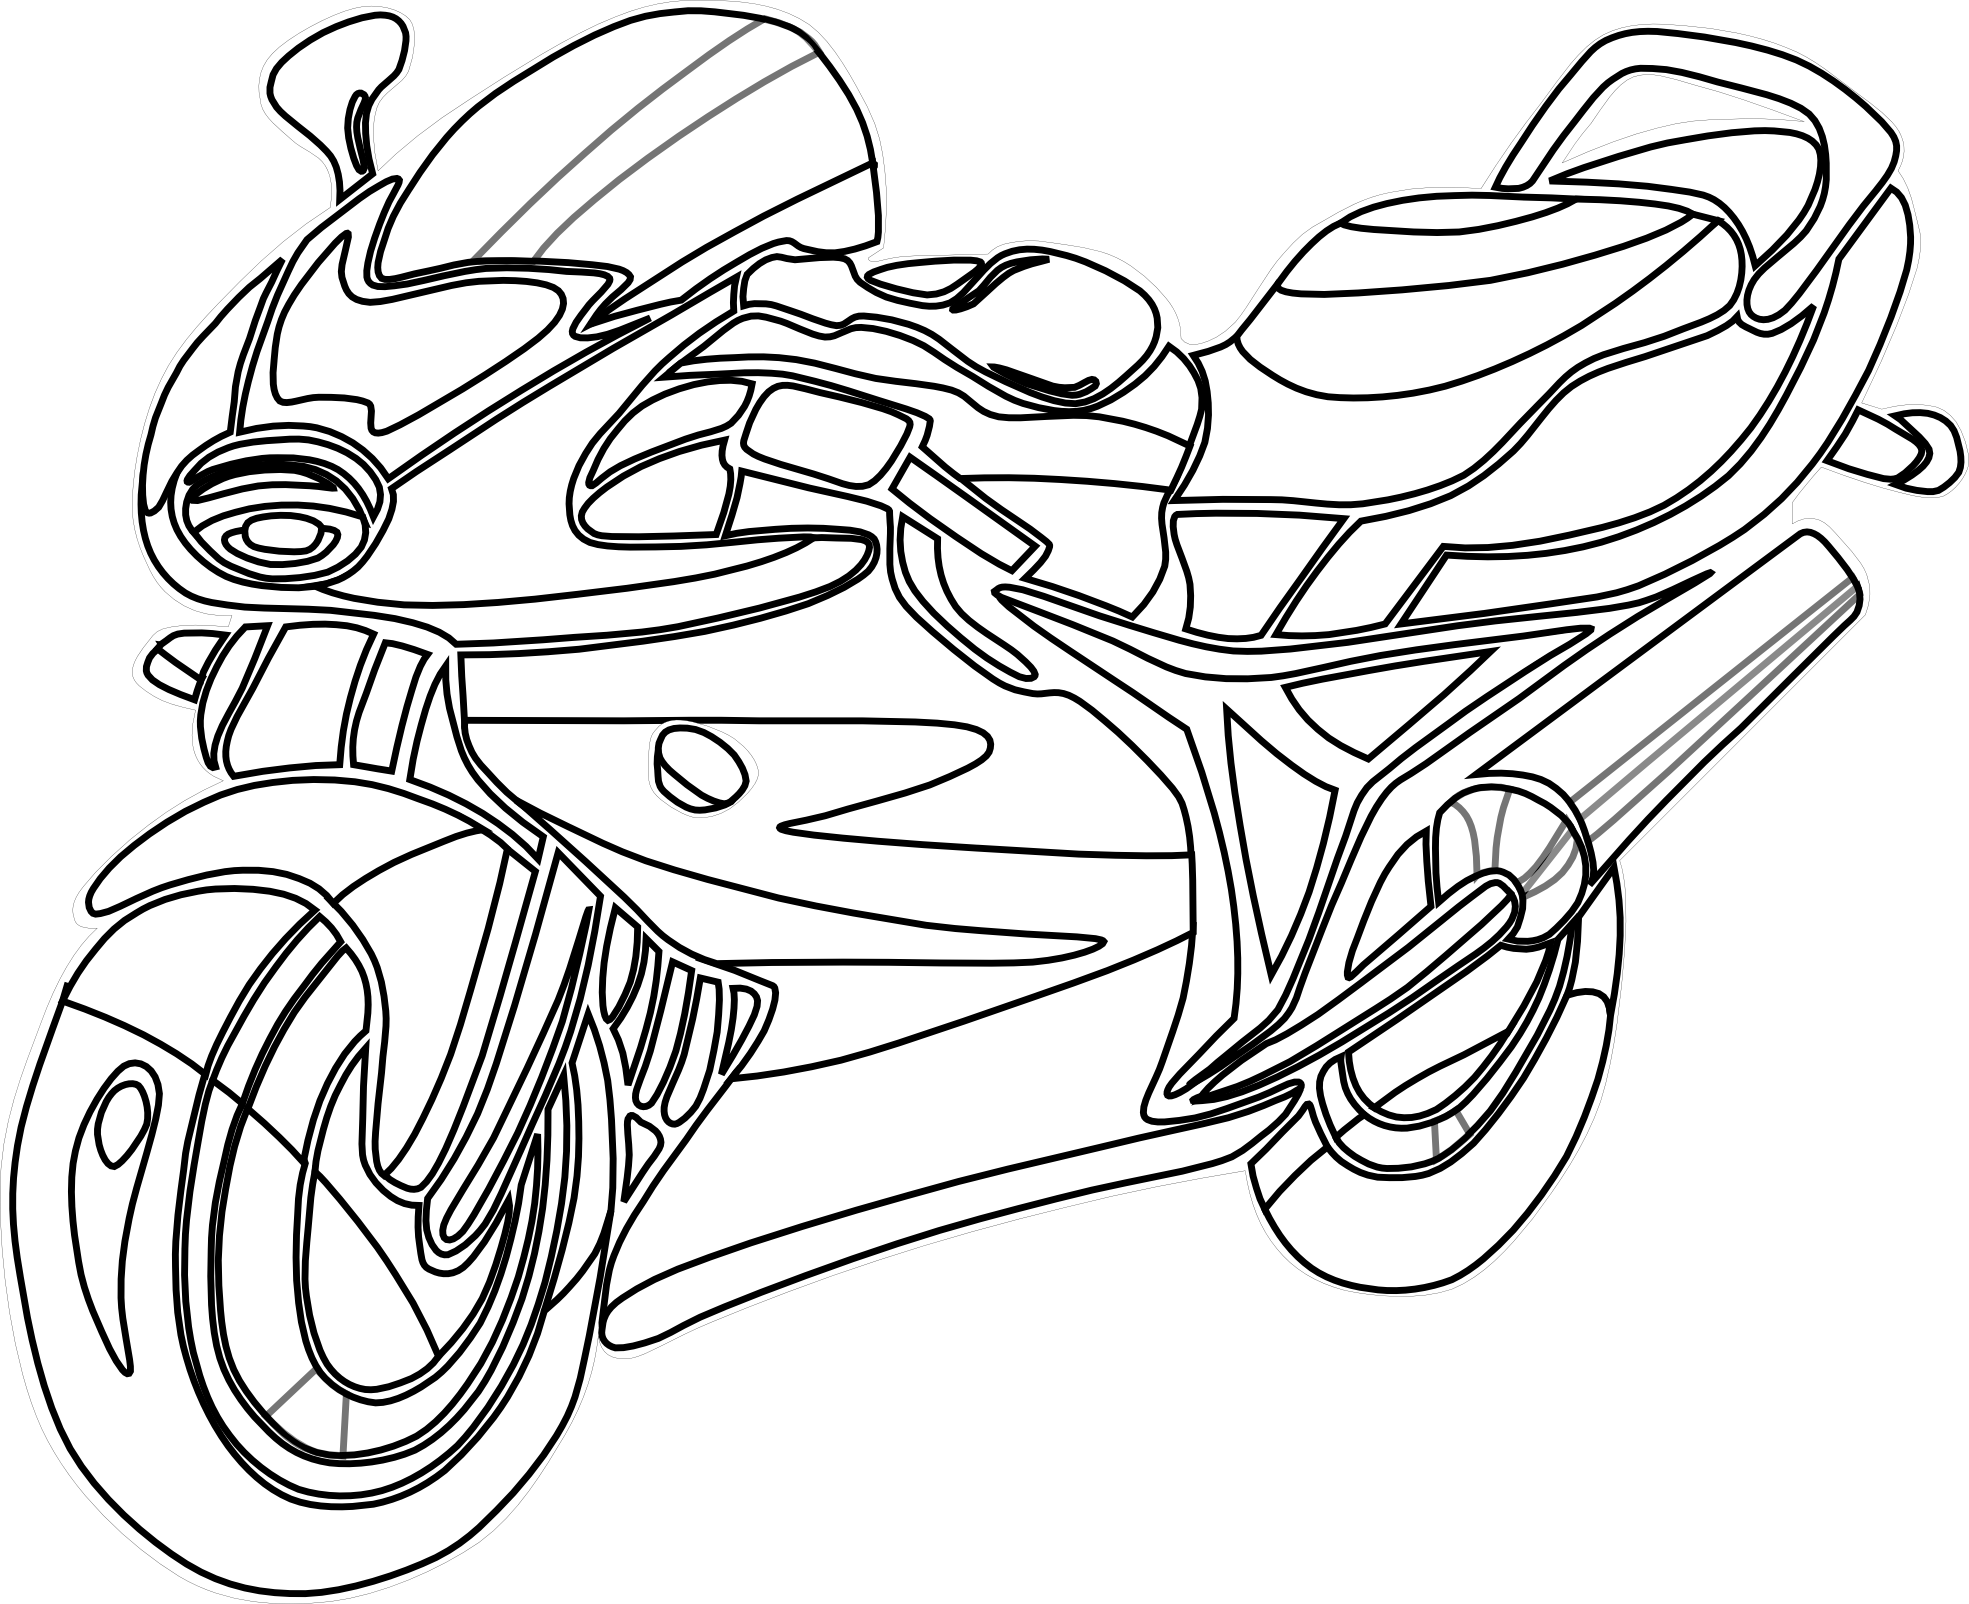 motorcycle clipart black white line art coloring ...